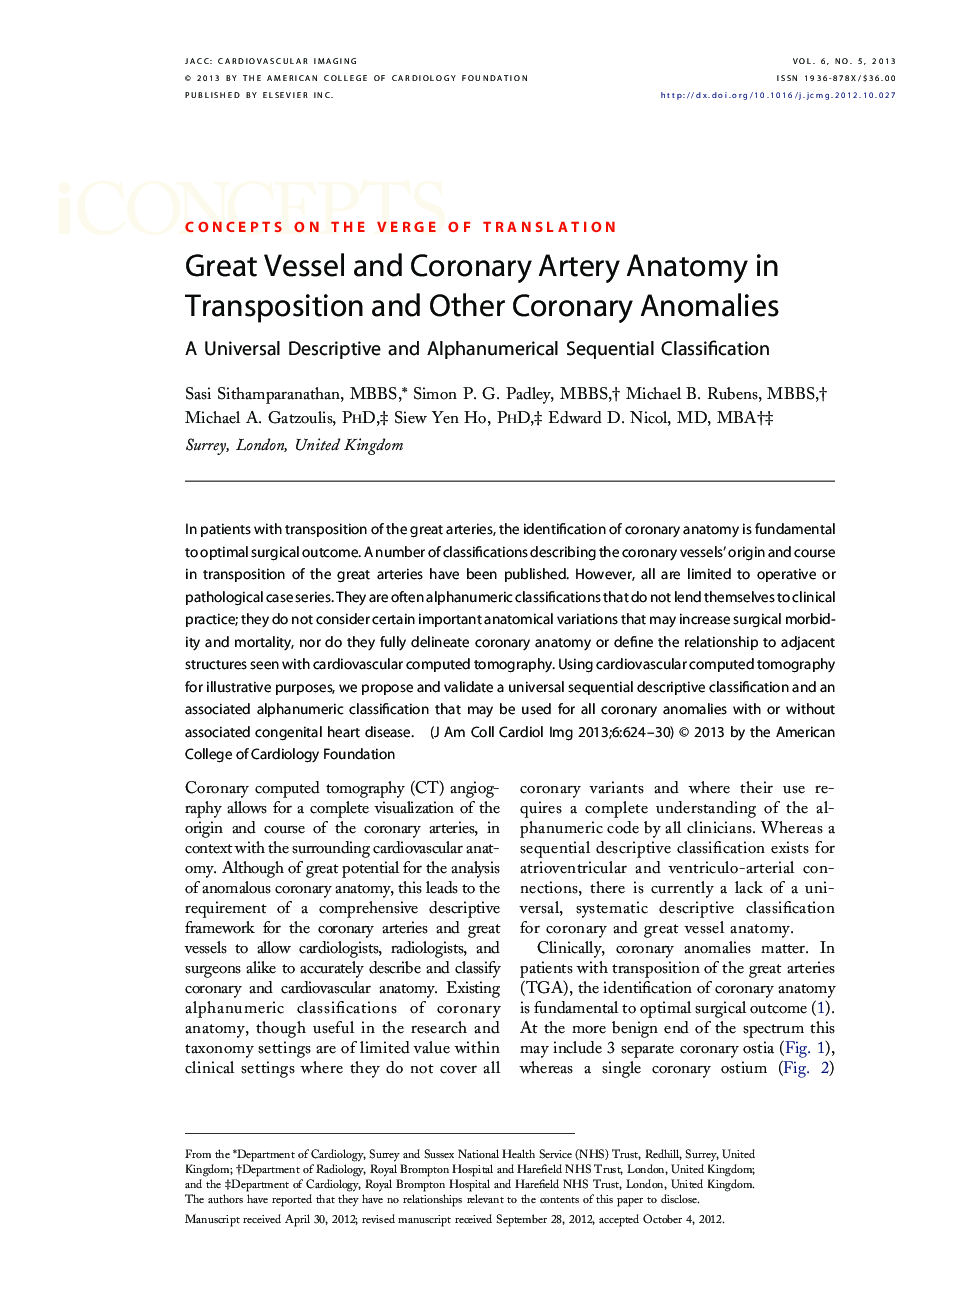 Great Vessel and Coronary Artery Anatomy in Transposition and Other Coronary Anomalies : A Universal Descriptive and Alphanumerical Sequential Classification